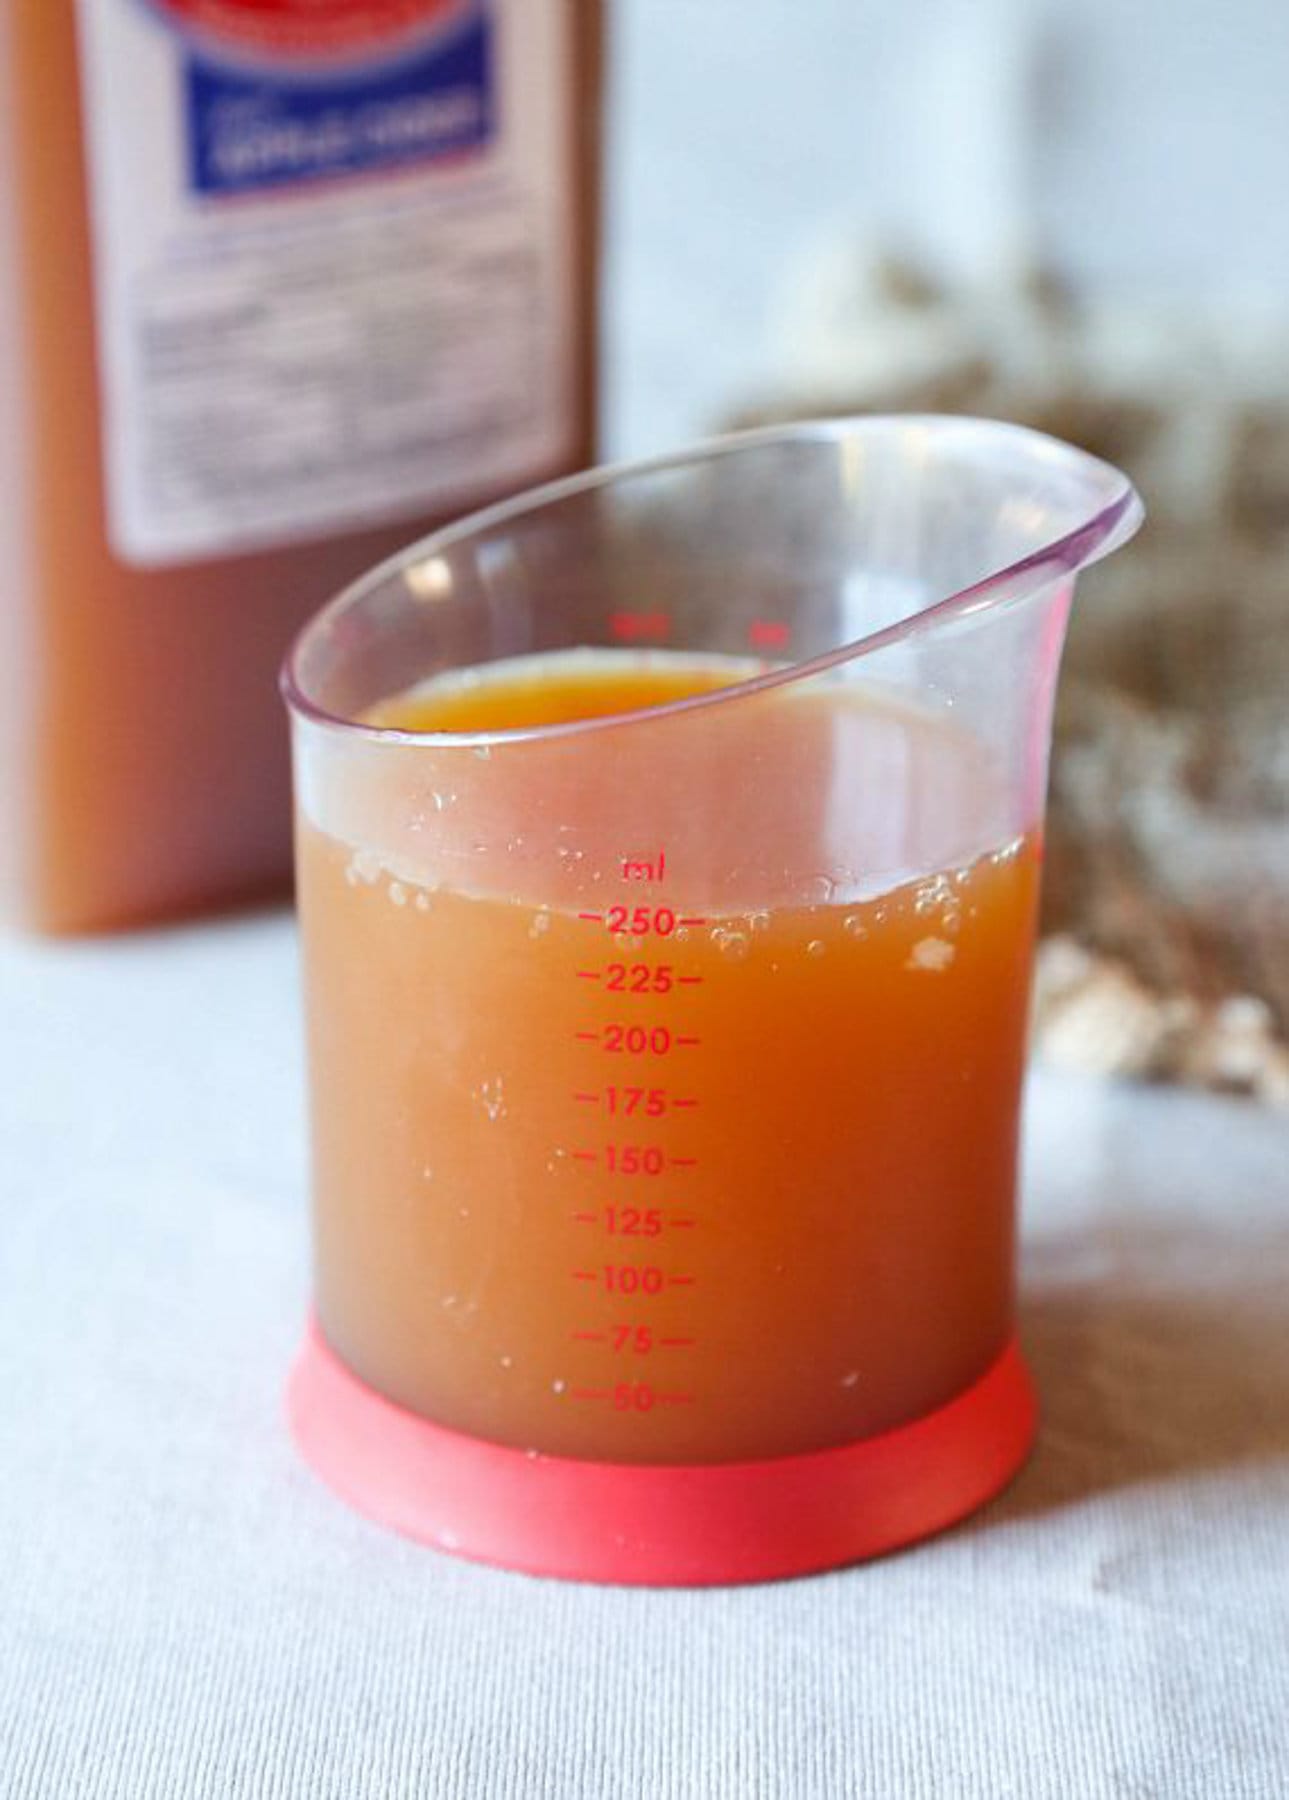 250 mL of apple cider in a measuring cup